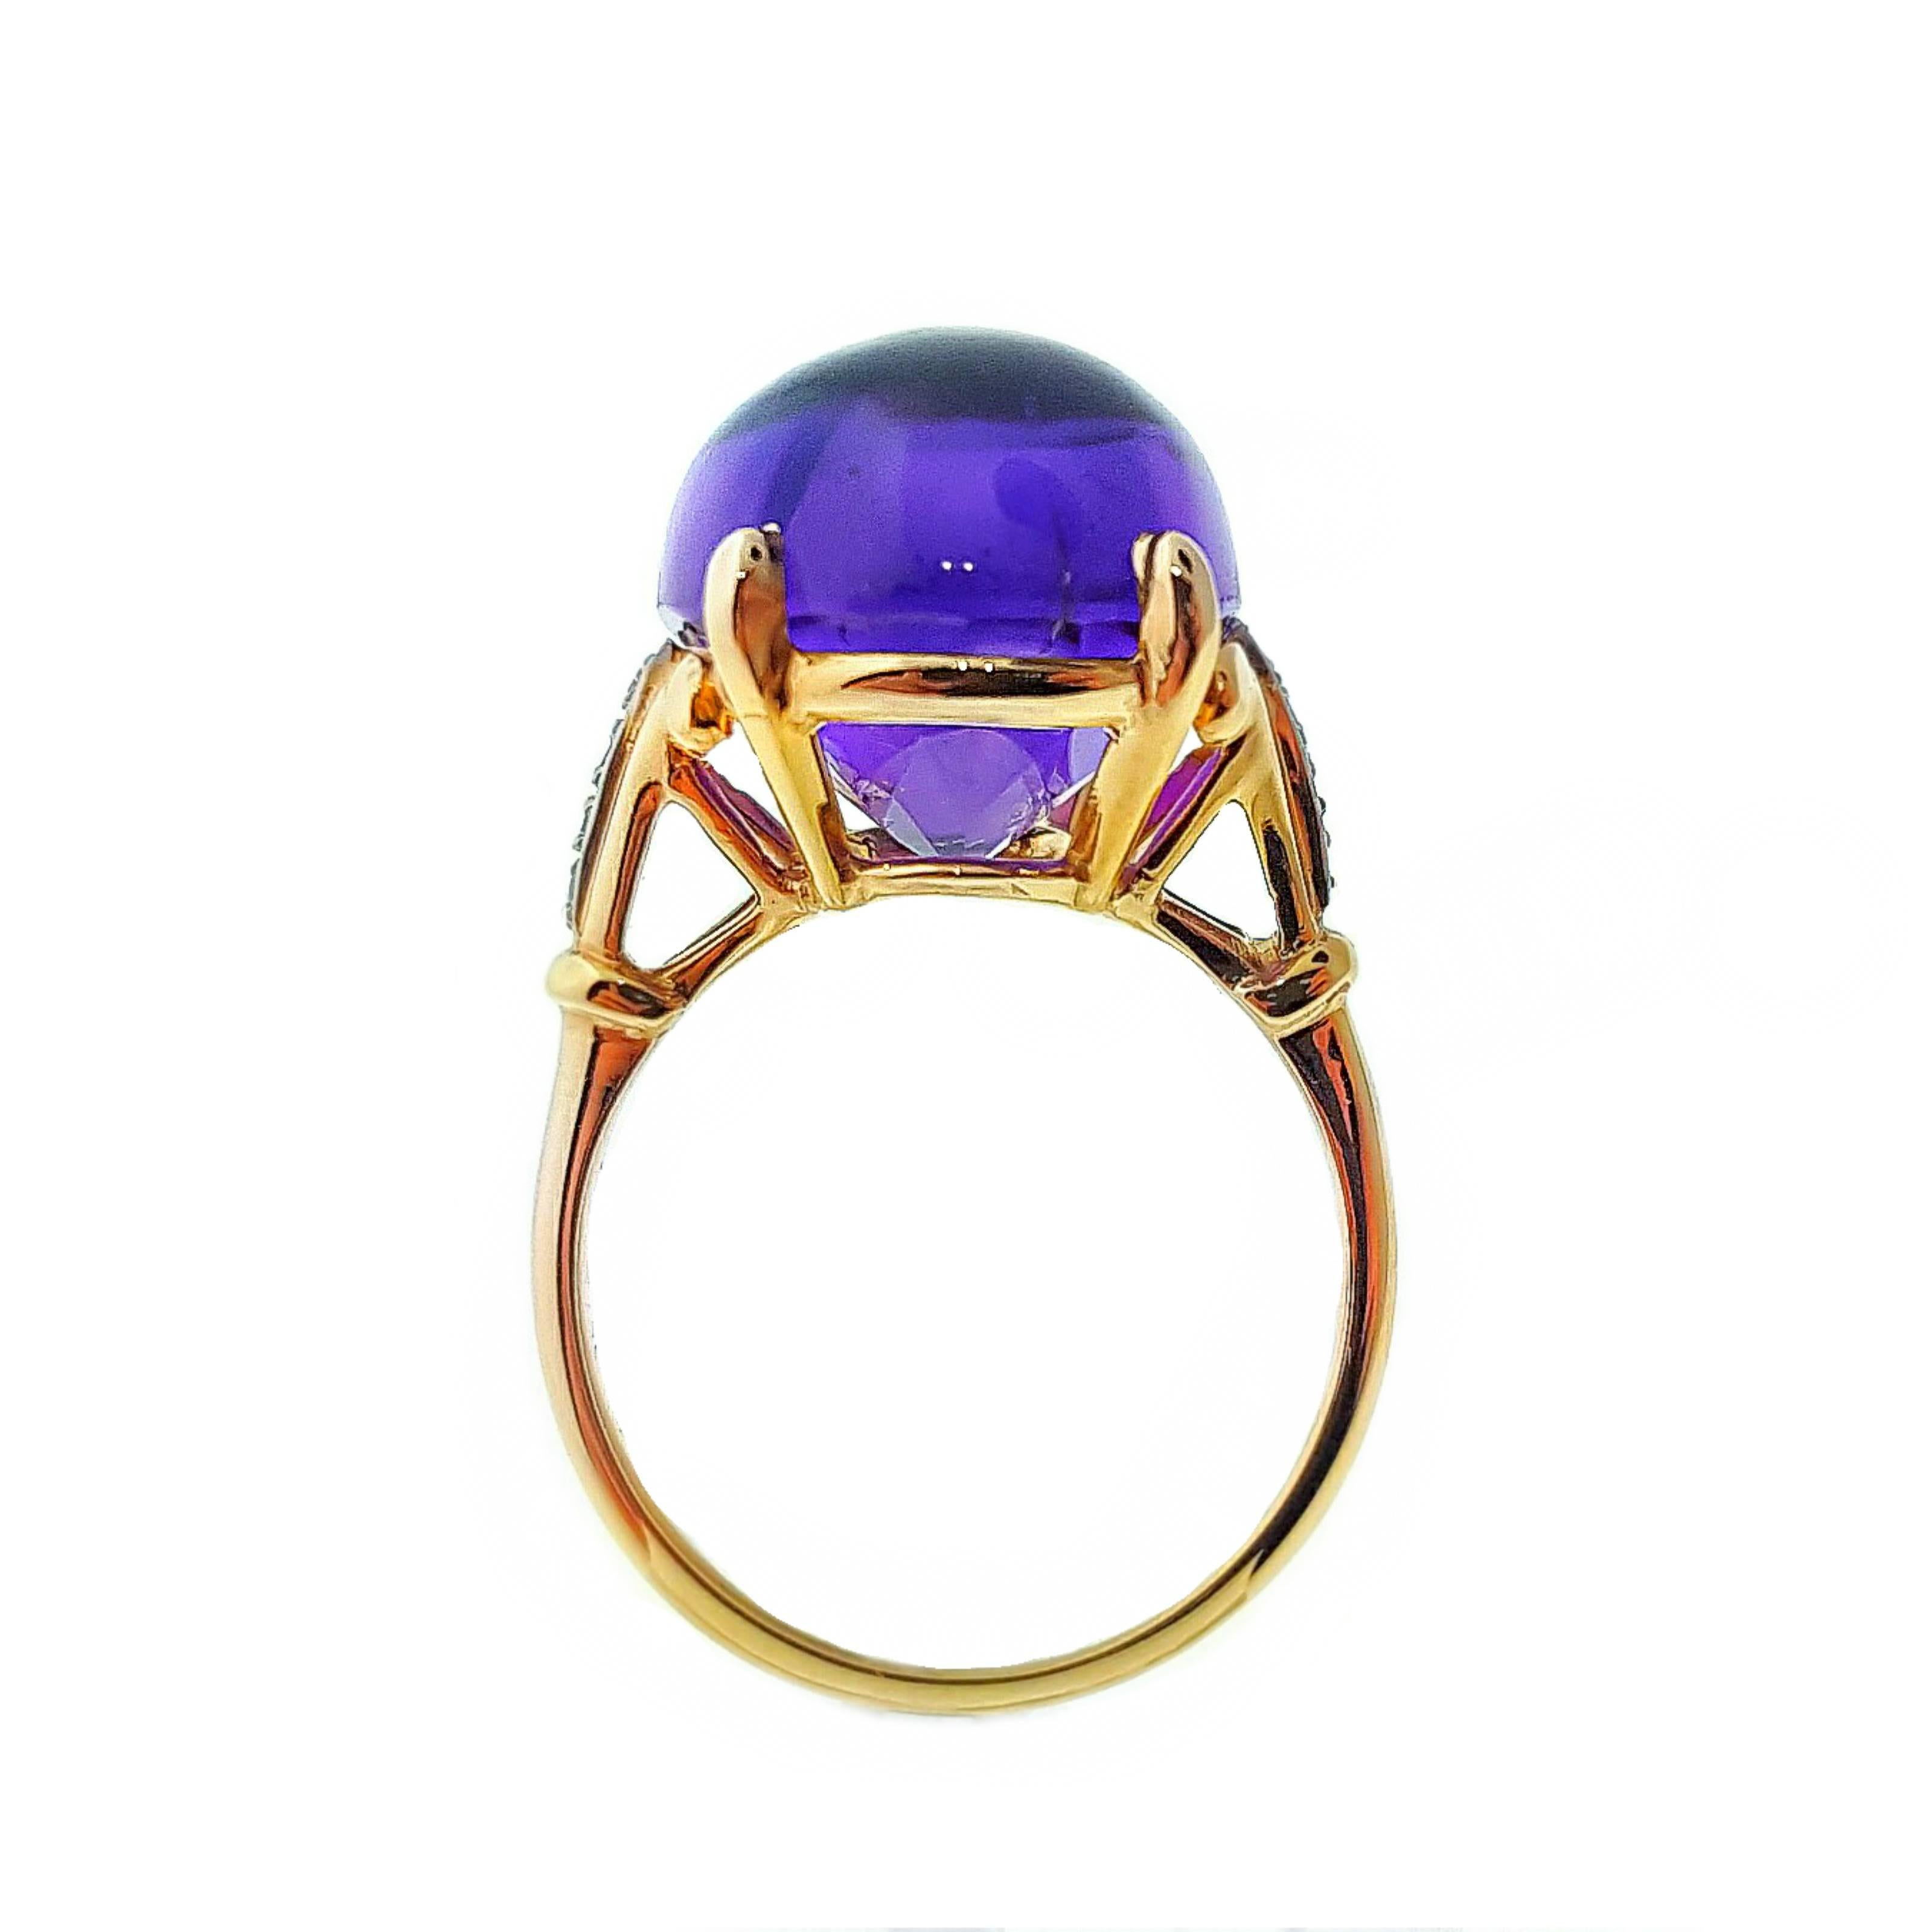 A dreamy 10.49ct cabochon amethyst sits at the center of this Art Deco Raymond Yard ring.  Accented with .10ctw of sparkling diamonds in high polished 14kt yellow gold. The ring is a US size 5.75 and measures approximately 16.5mm x 12.5mm at the top